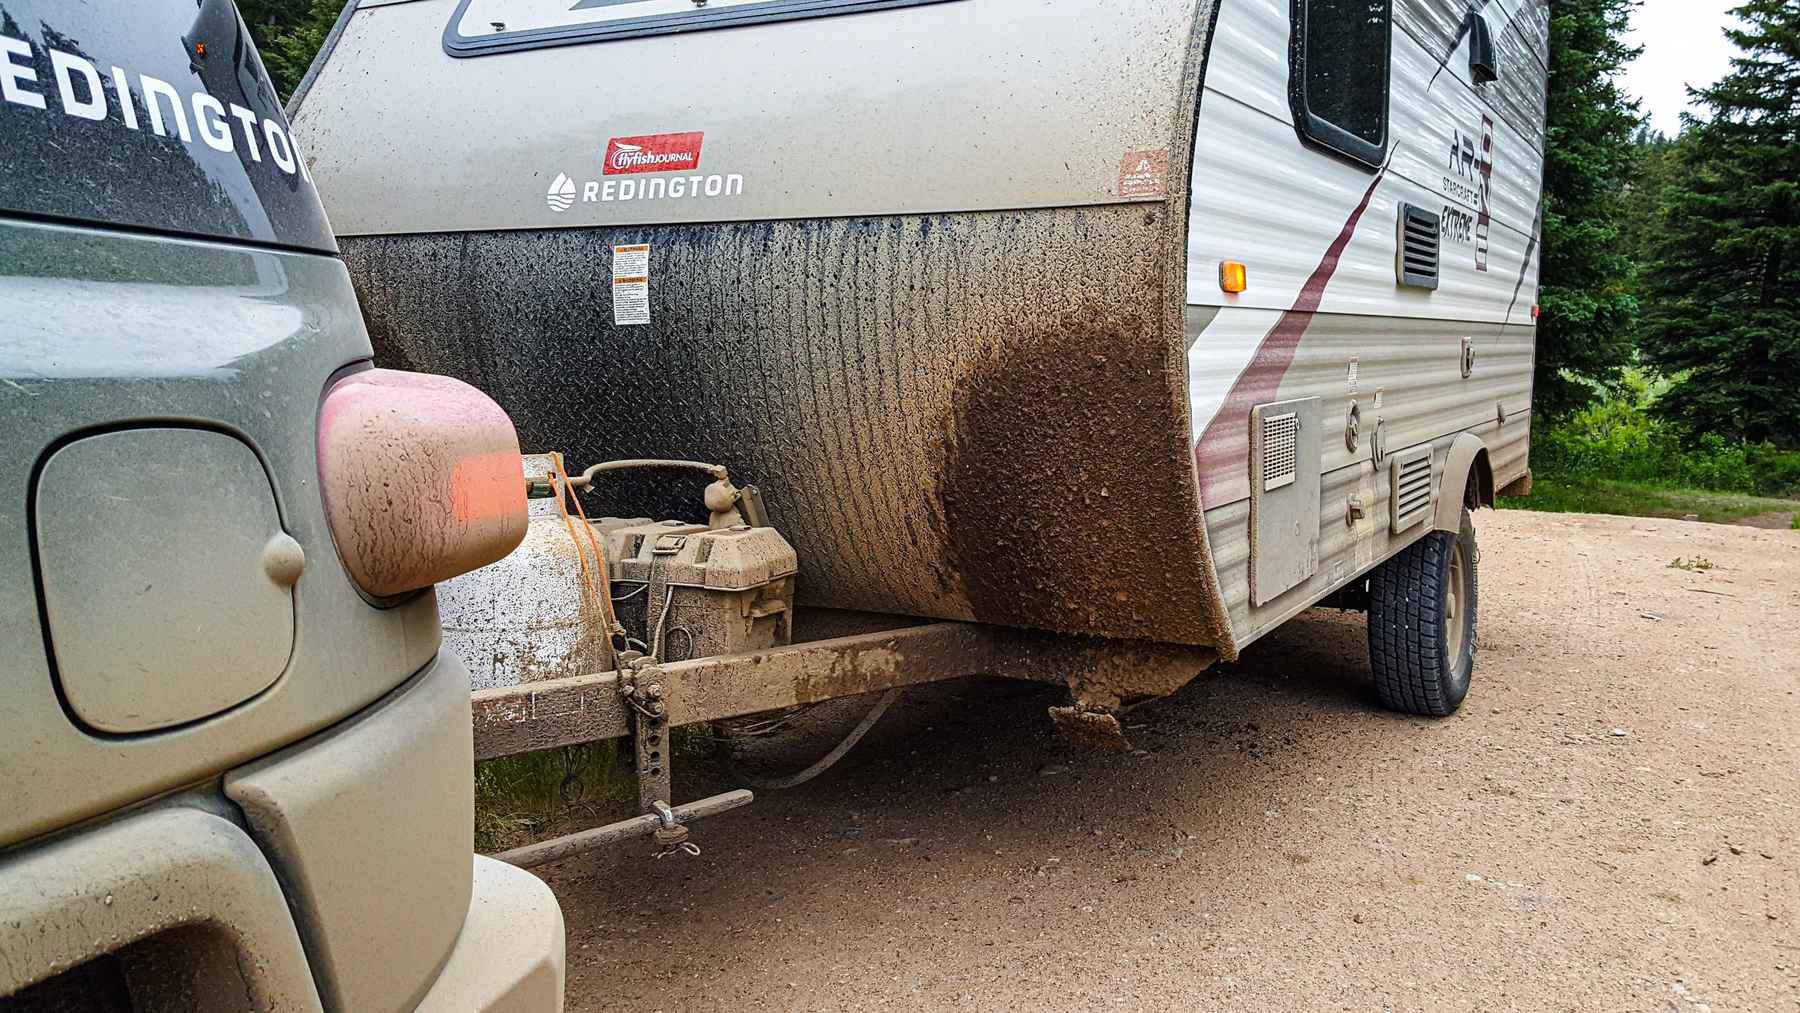 Here's What Makes a Great Fishing RV - Camping World Blog